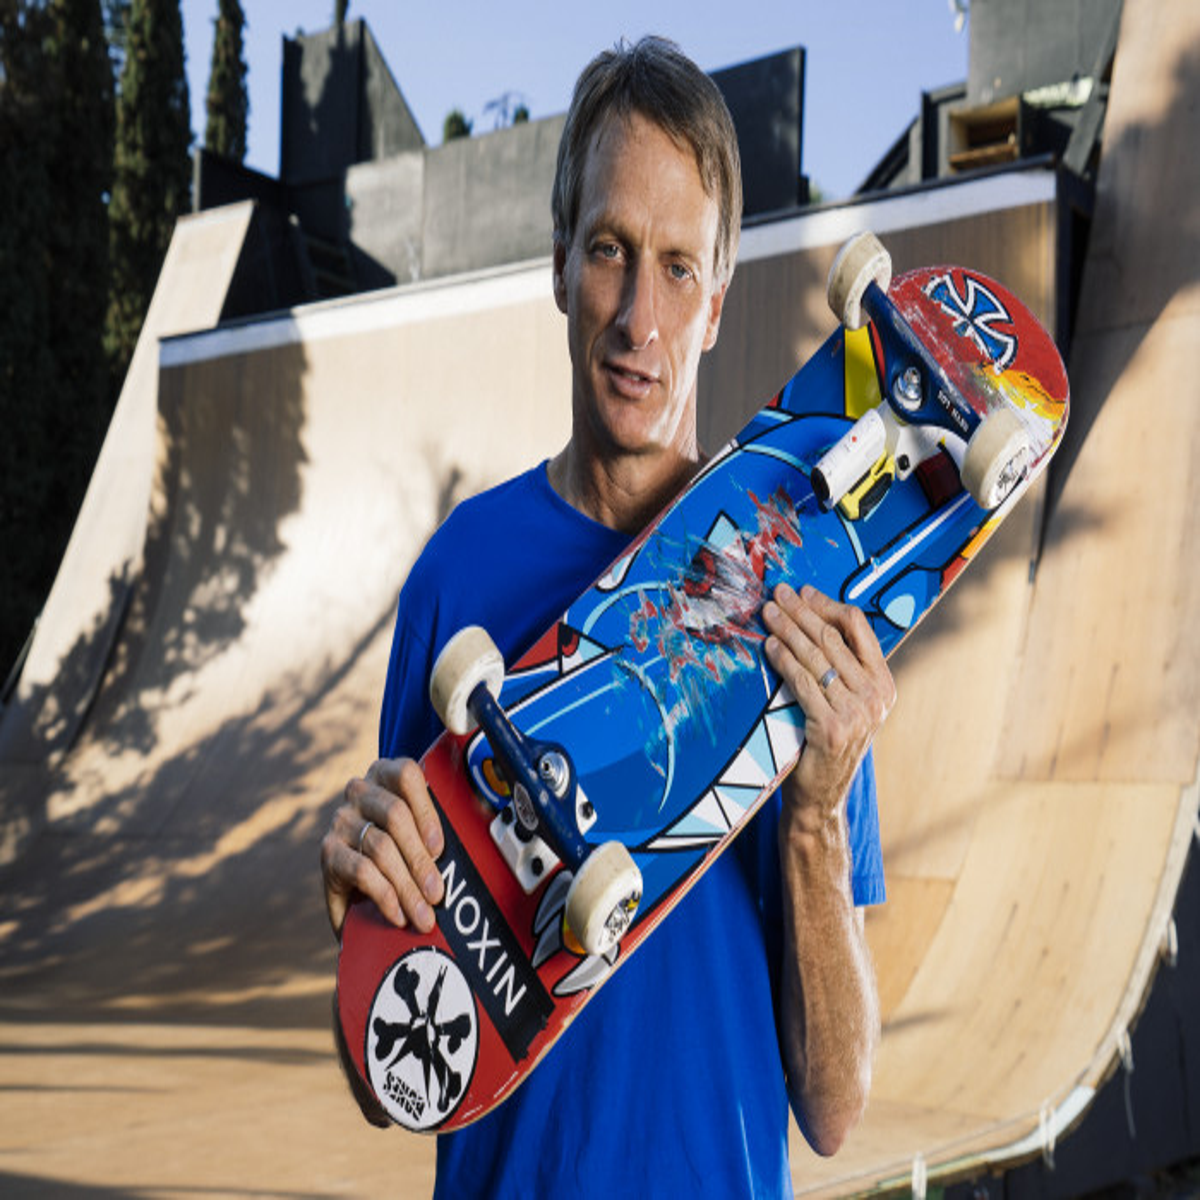 Five Classic Tracks Won't Be In The Tony Hawk's Pro Skater Remasters